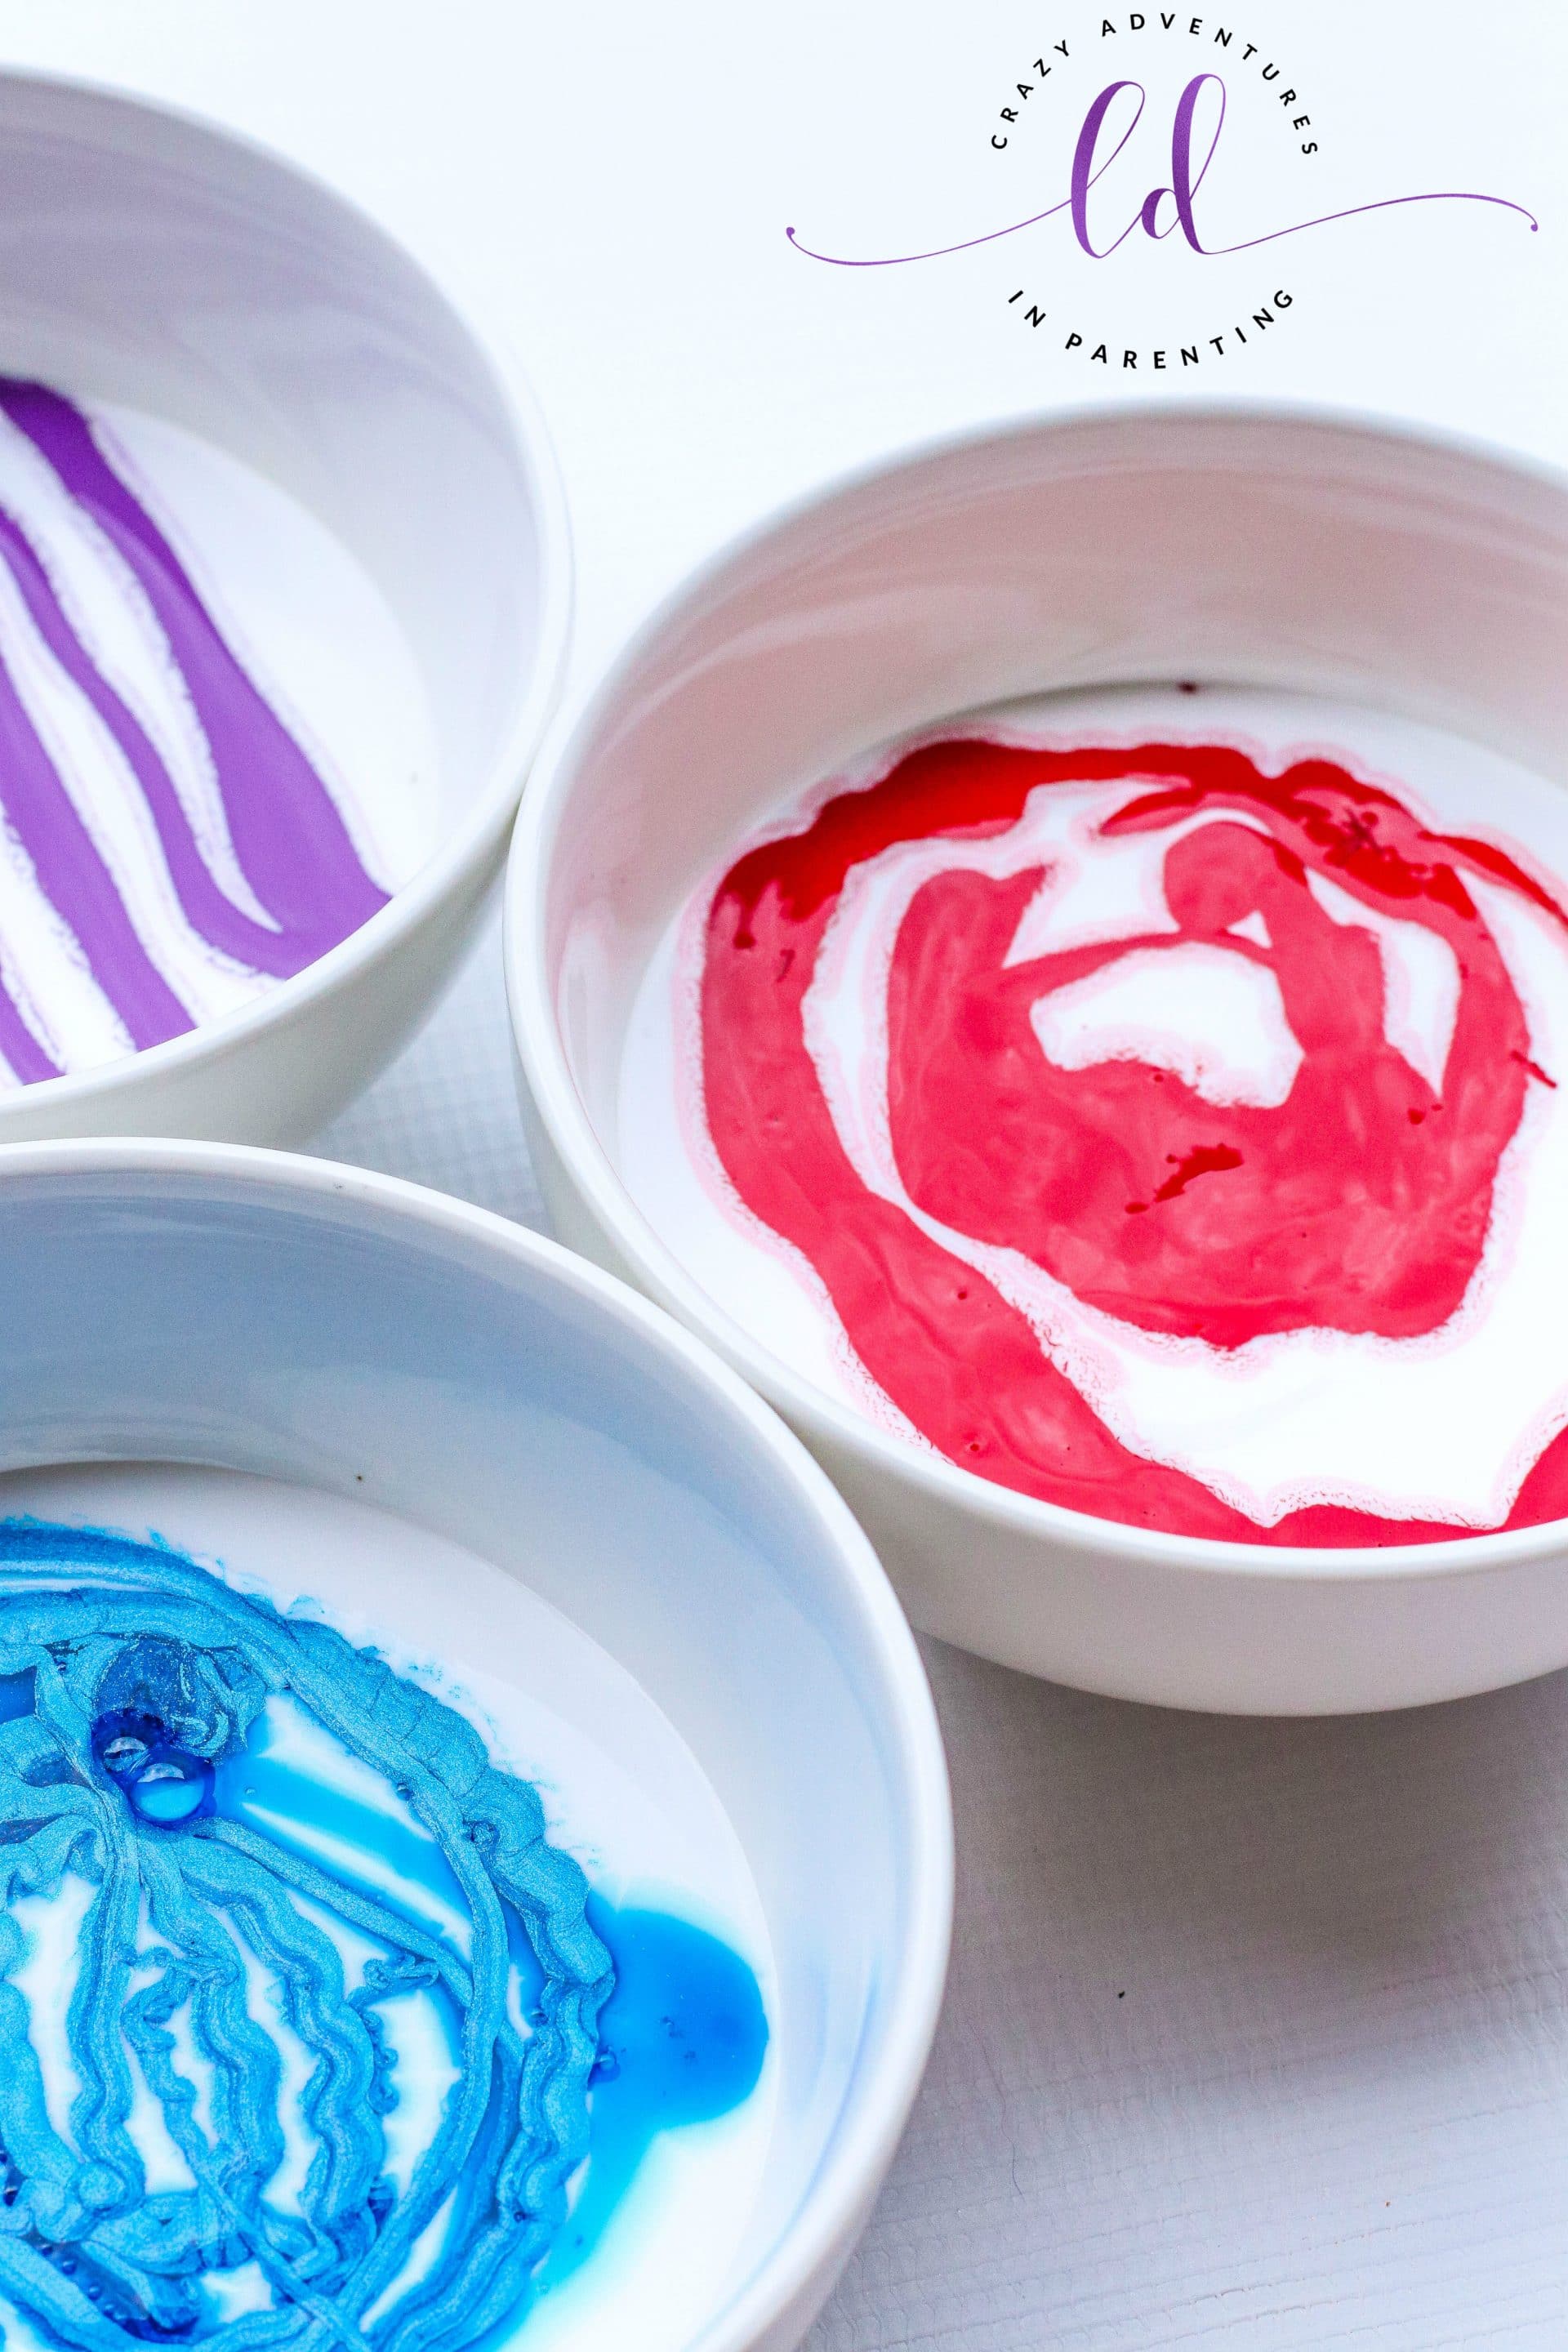 Mixing glue and color for Spiderman Slime recipe